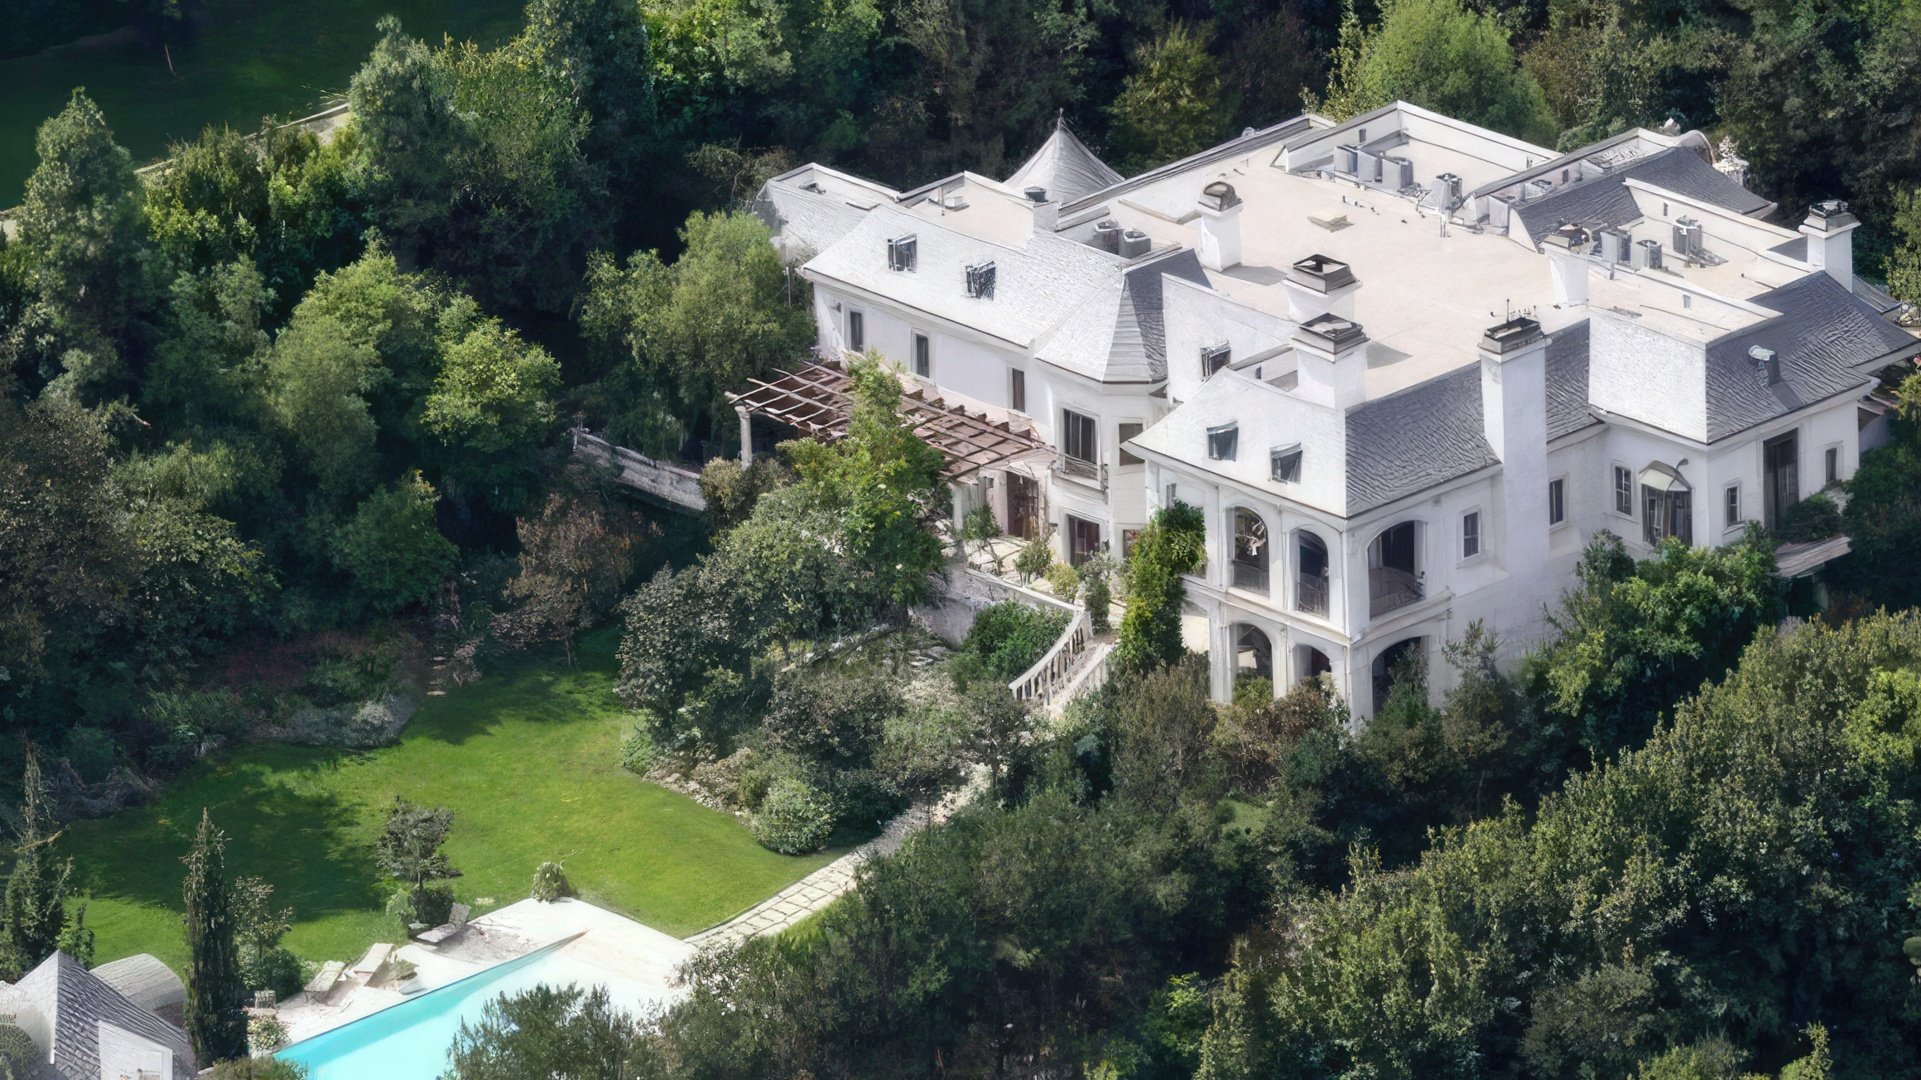 Mansion in Holmby Hills rented by Michael Jackson